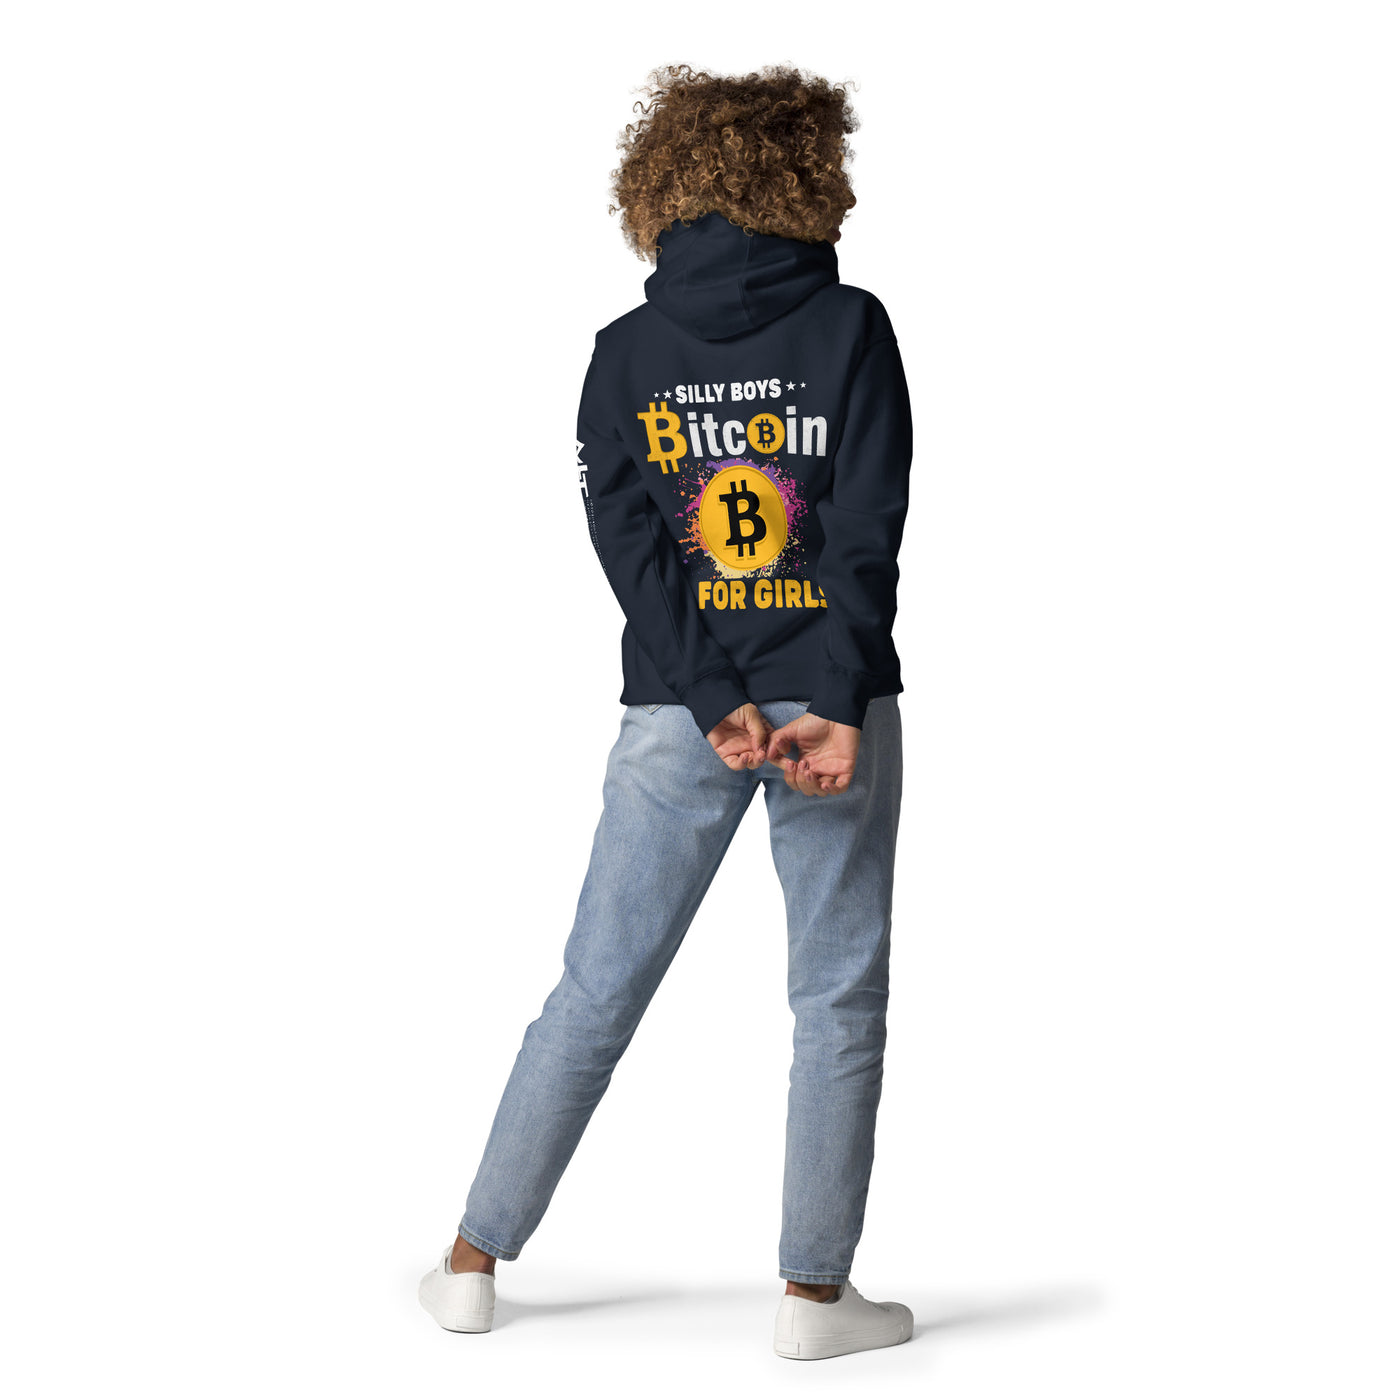 *Silly Boys* : BTC is for Girls - Unisex Hoodie ( Back Print )